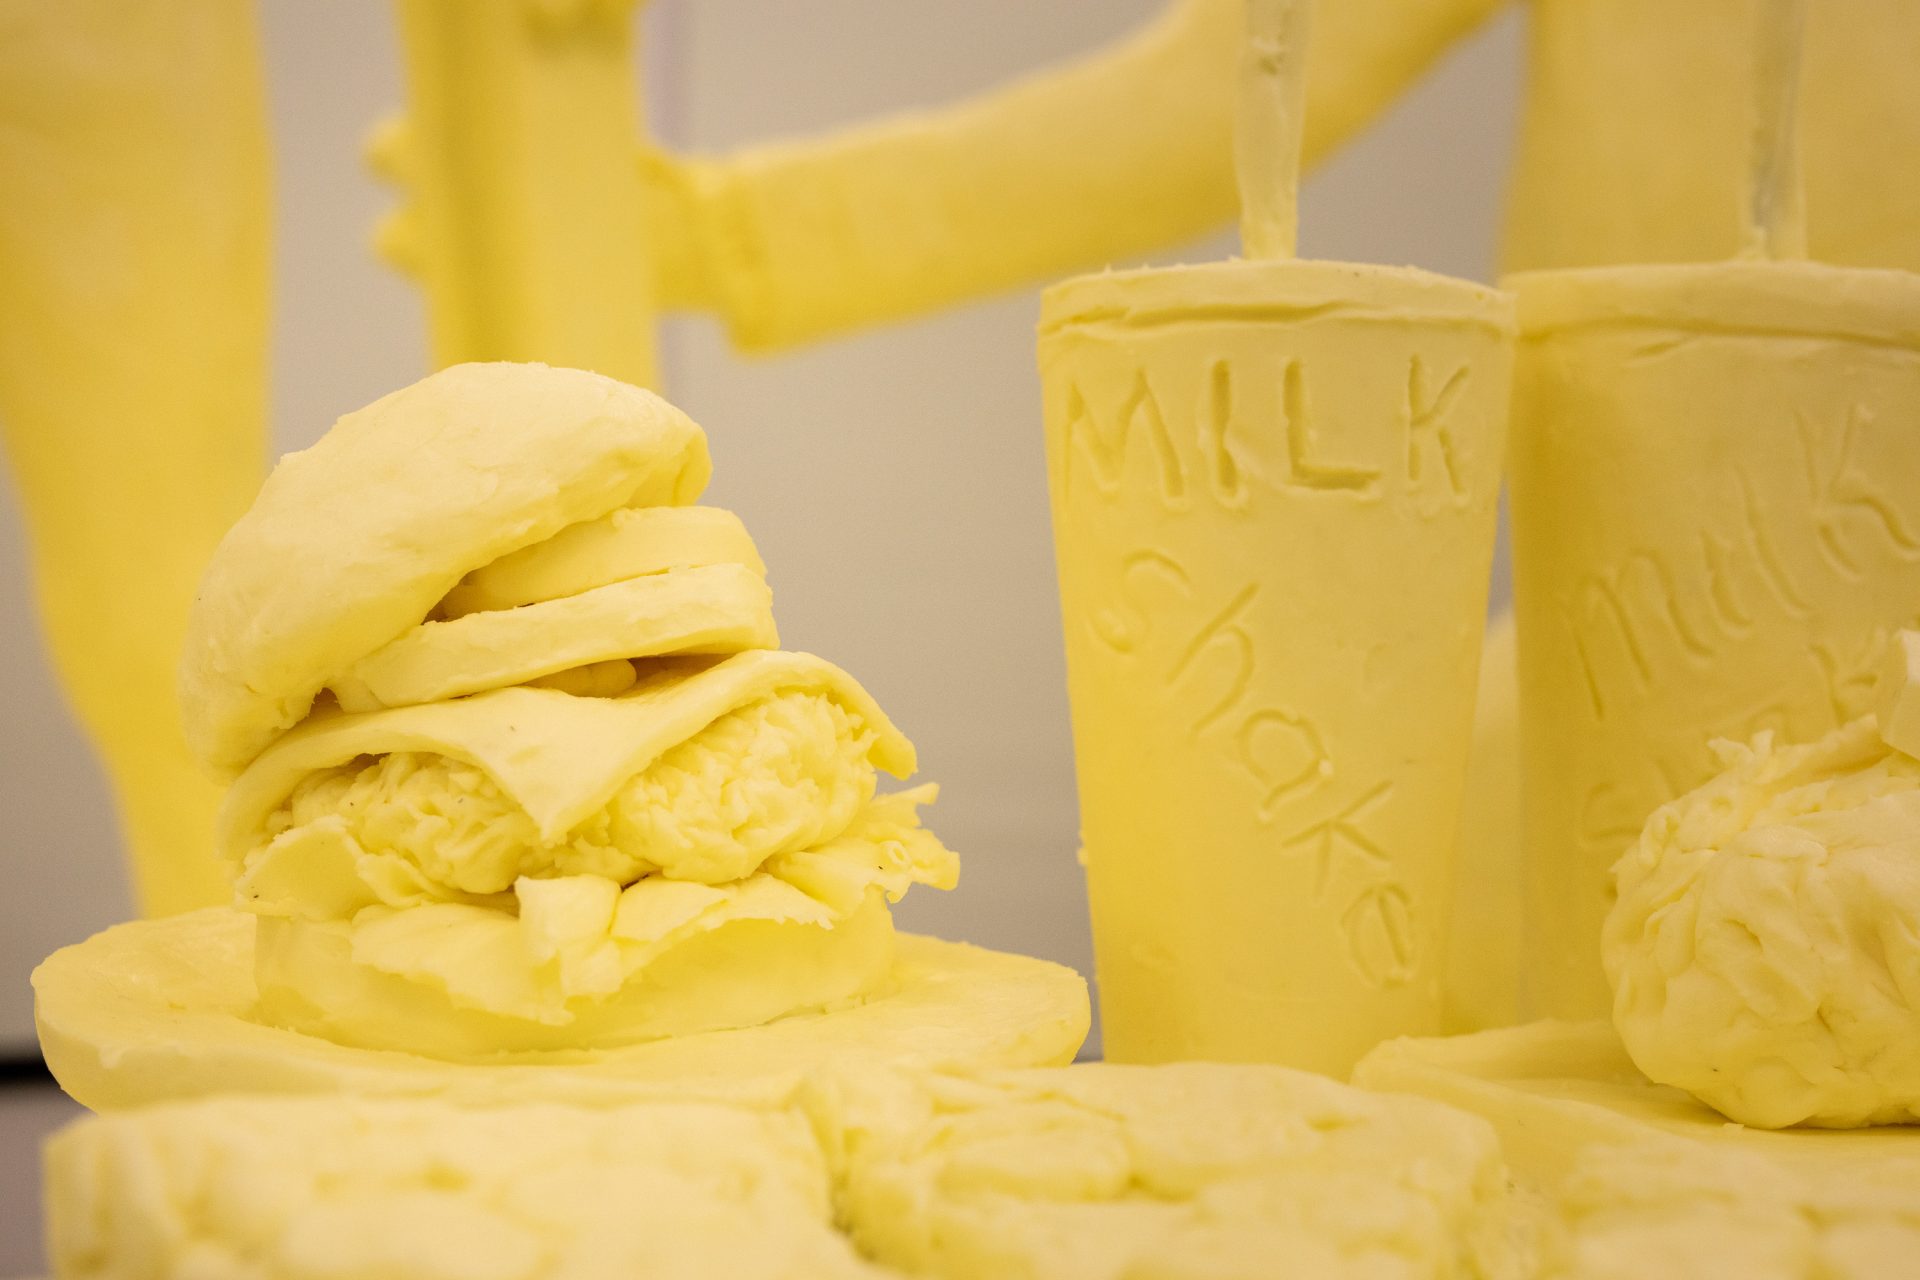 The tailgating-themed 2020 Pennsylvania Farm Show butter sculpture features a spread of dairy products, including a cheeseburger, pizza and milkshakes.